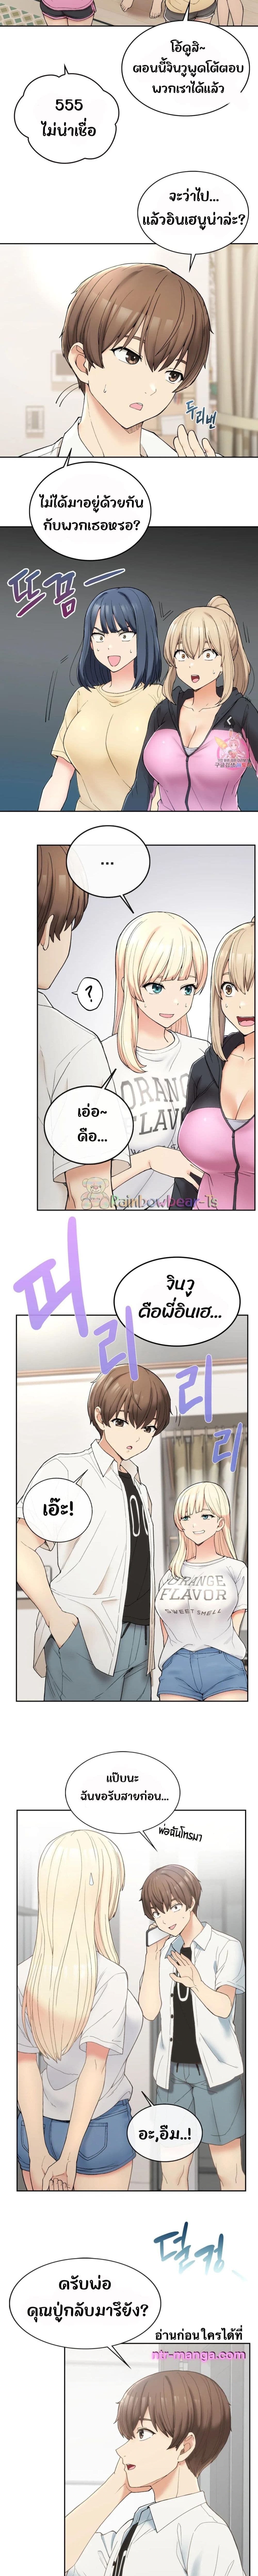 Shall We Live Together in the Country ตอนที่ 1 ภาพ 23